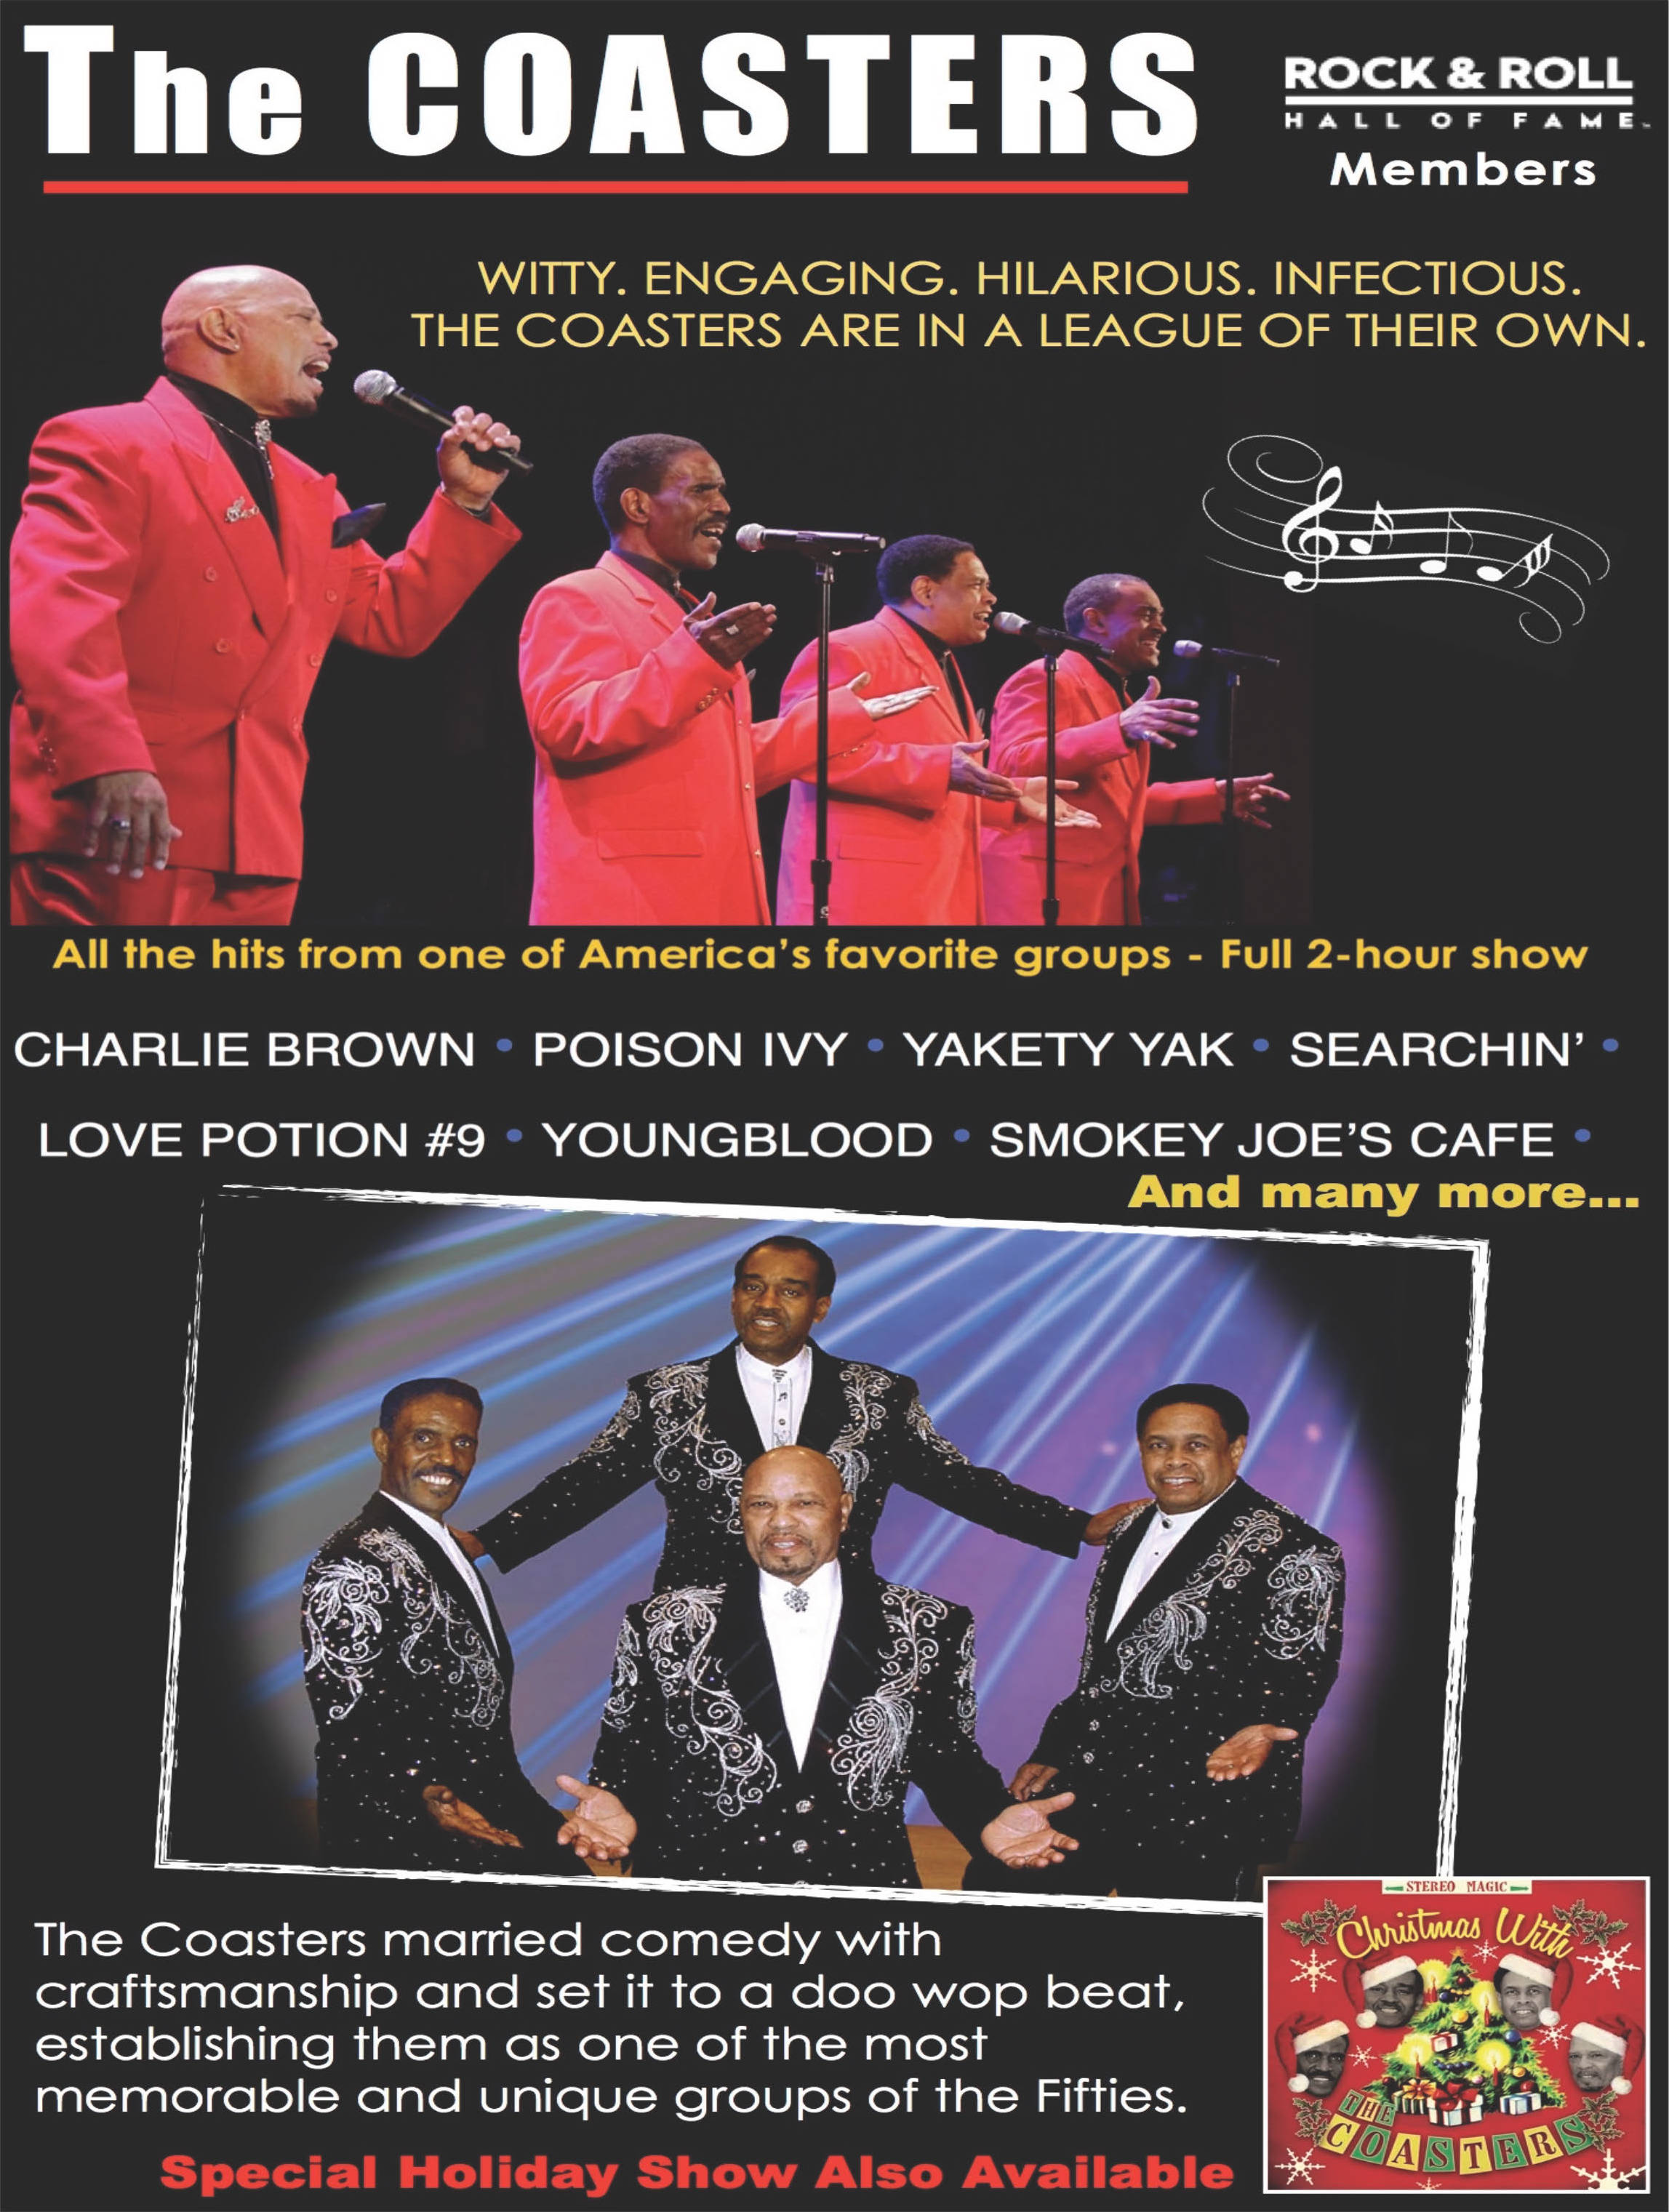 The Coasters; Rock & Roll Hall of Fame members; Witty. Engaging. Hilarious. Infectious. The Coasters are in a league of their own.; All the hits from one of America's favorite groups - Full 2 hour show